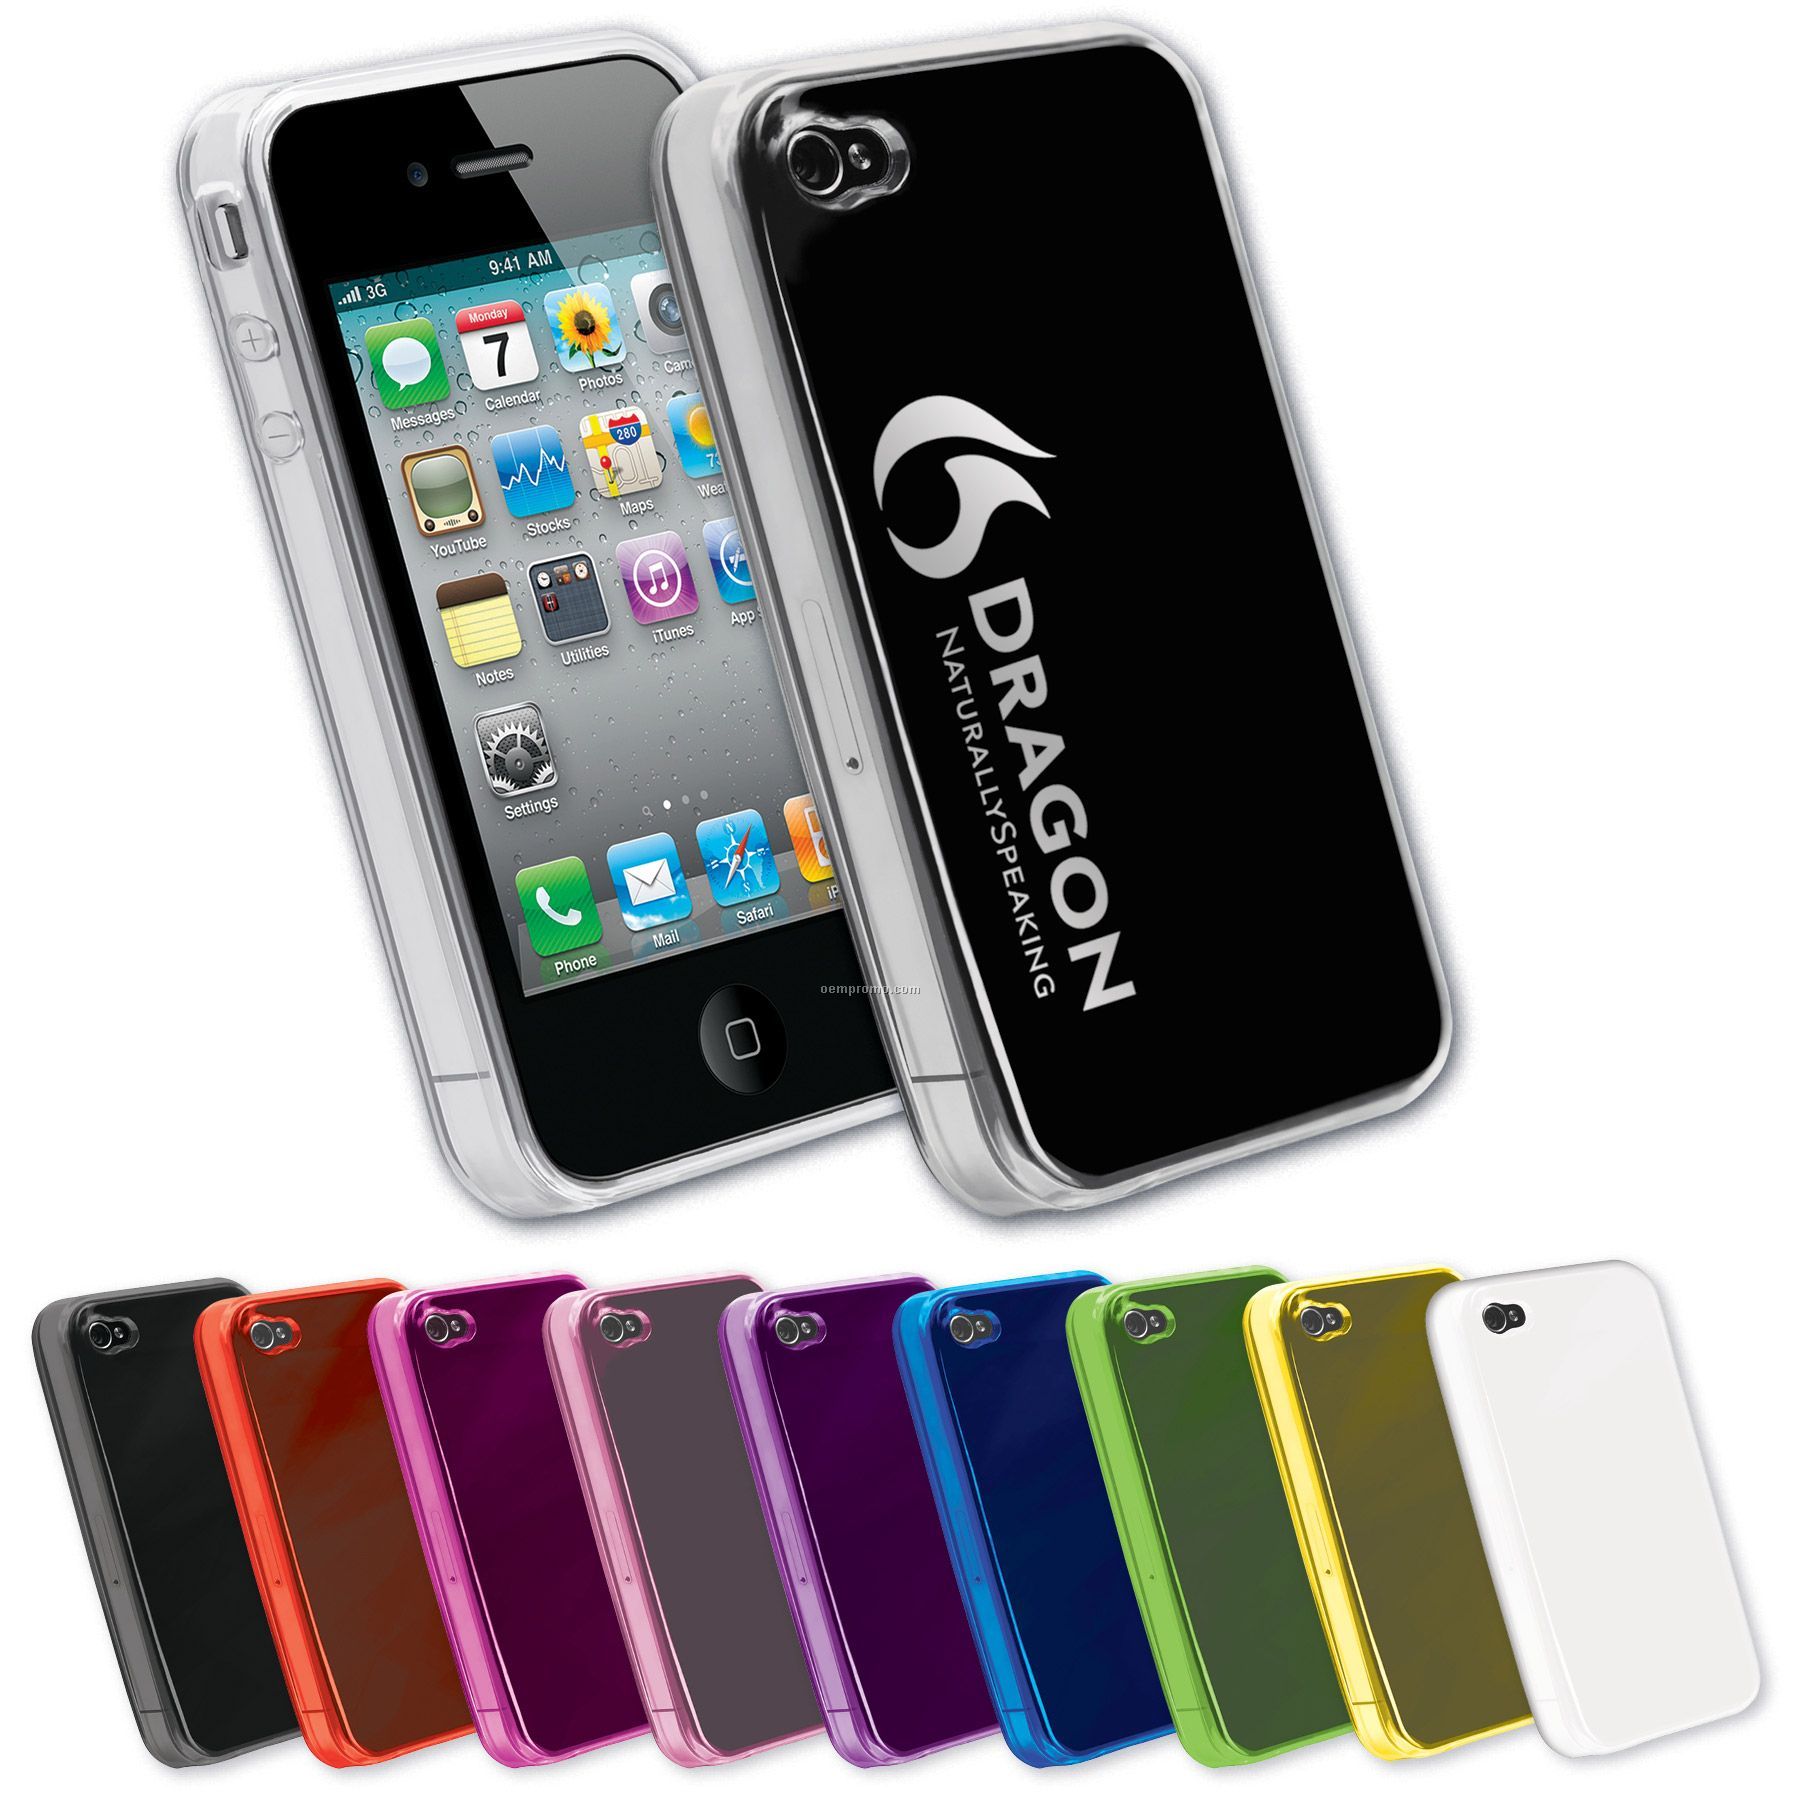 Myphone Case For Iphone 4